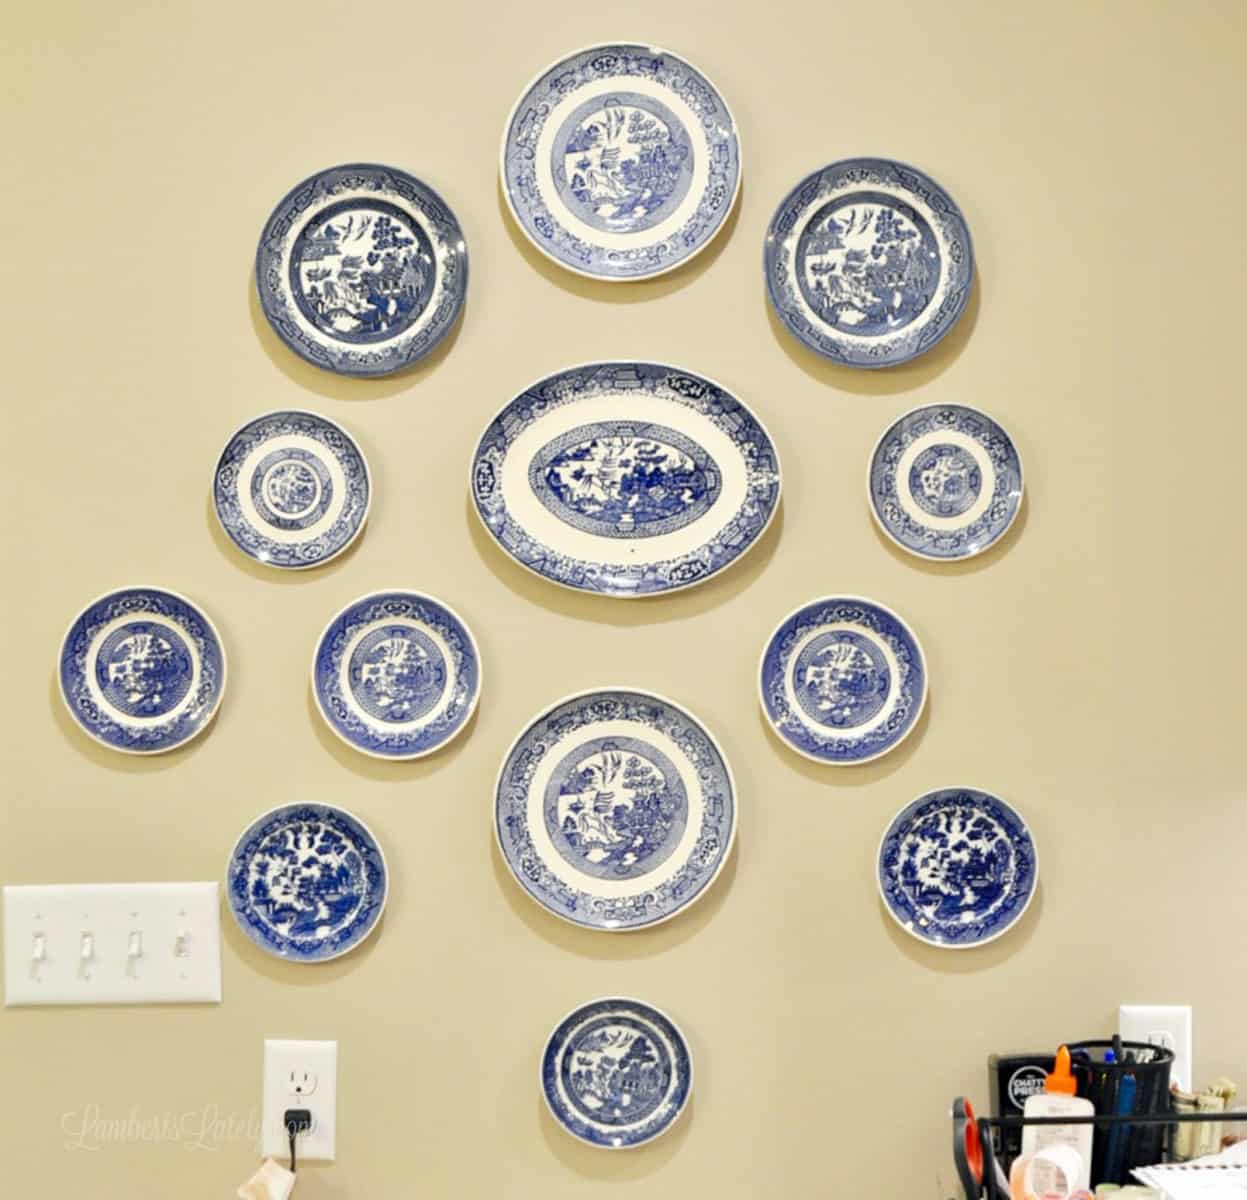 partially finished plate and platter gallery wall.